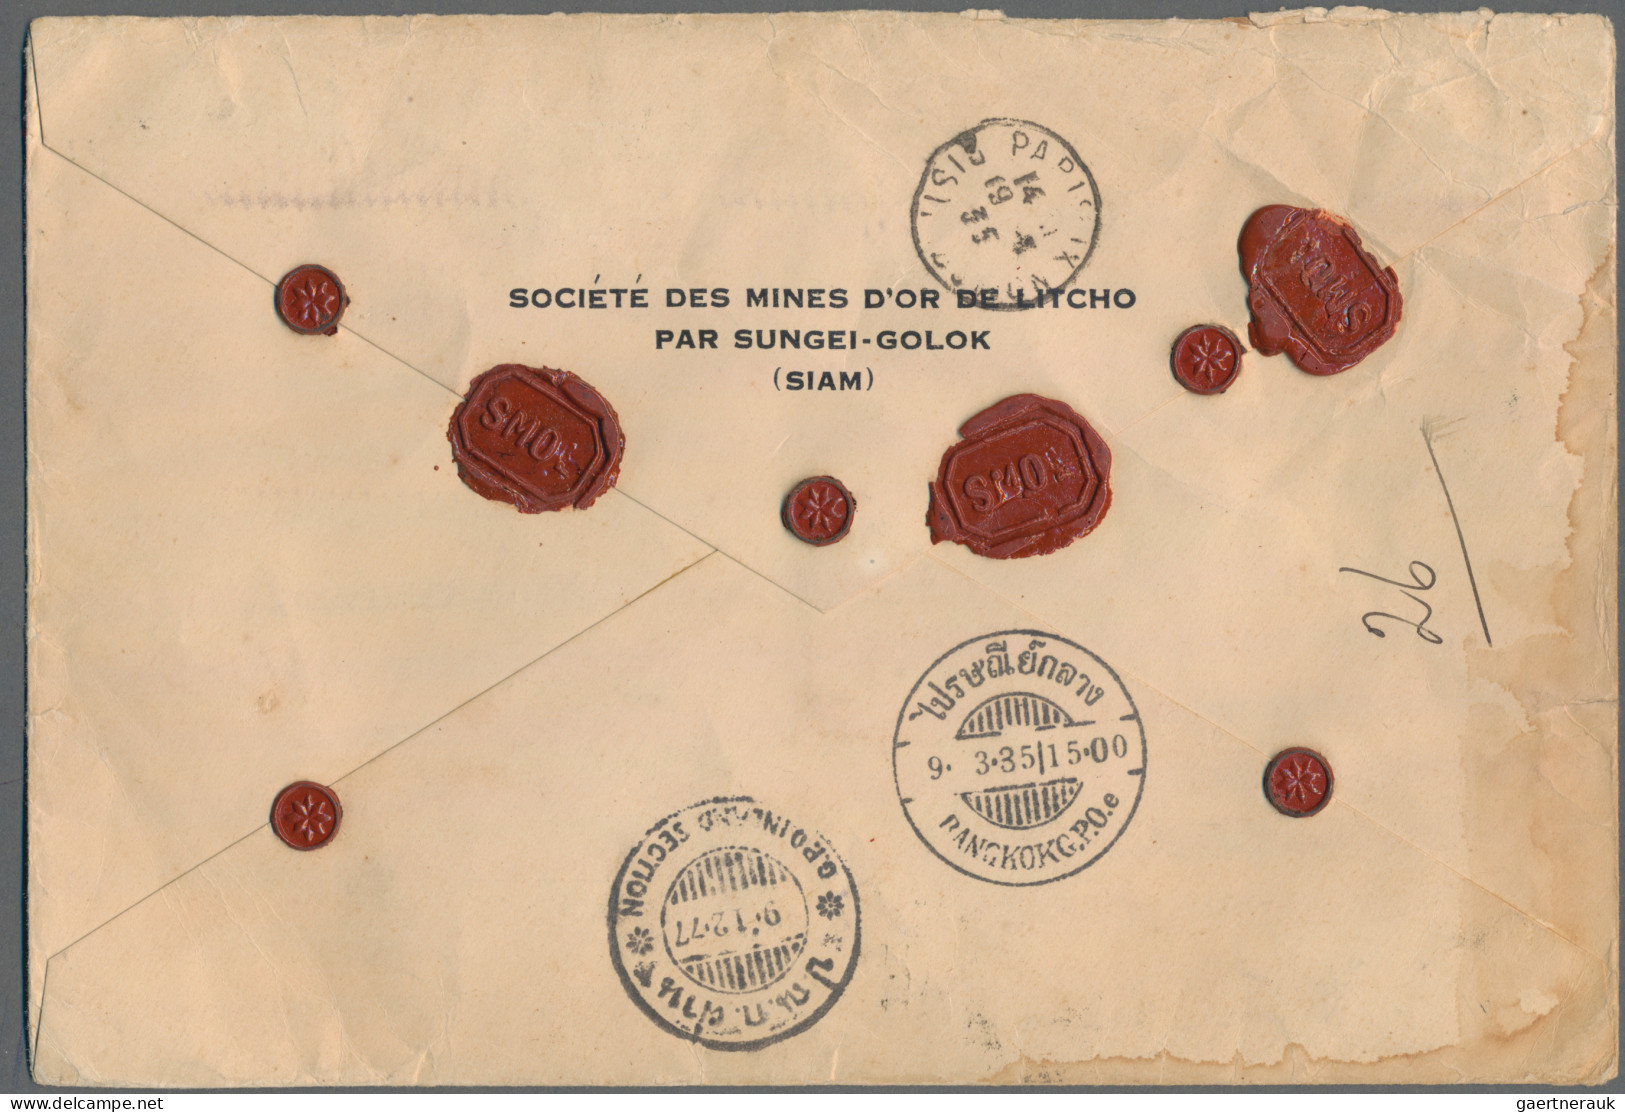 Thailand: 1935 Air Mail Envelope Used Registered From Sungei-Golok To Paris Via - Thailand